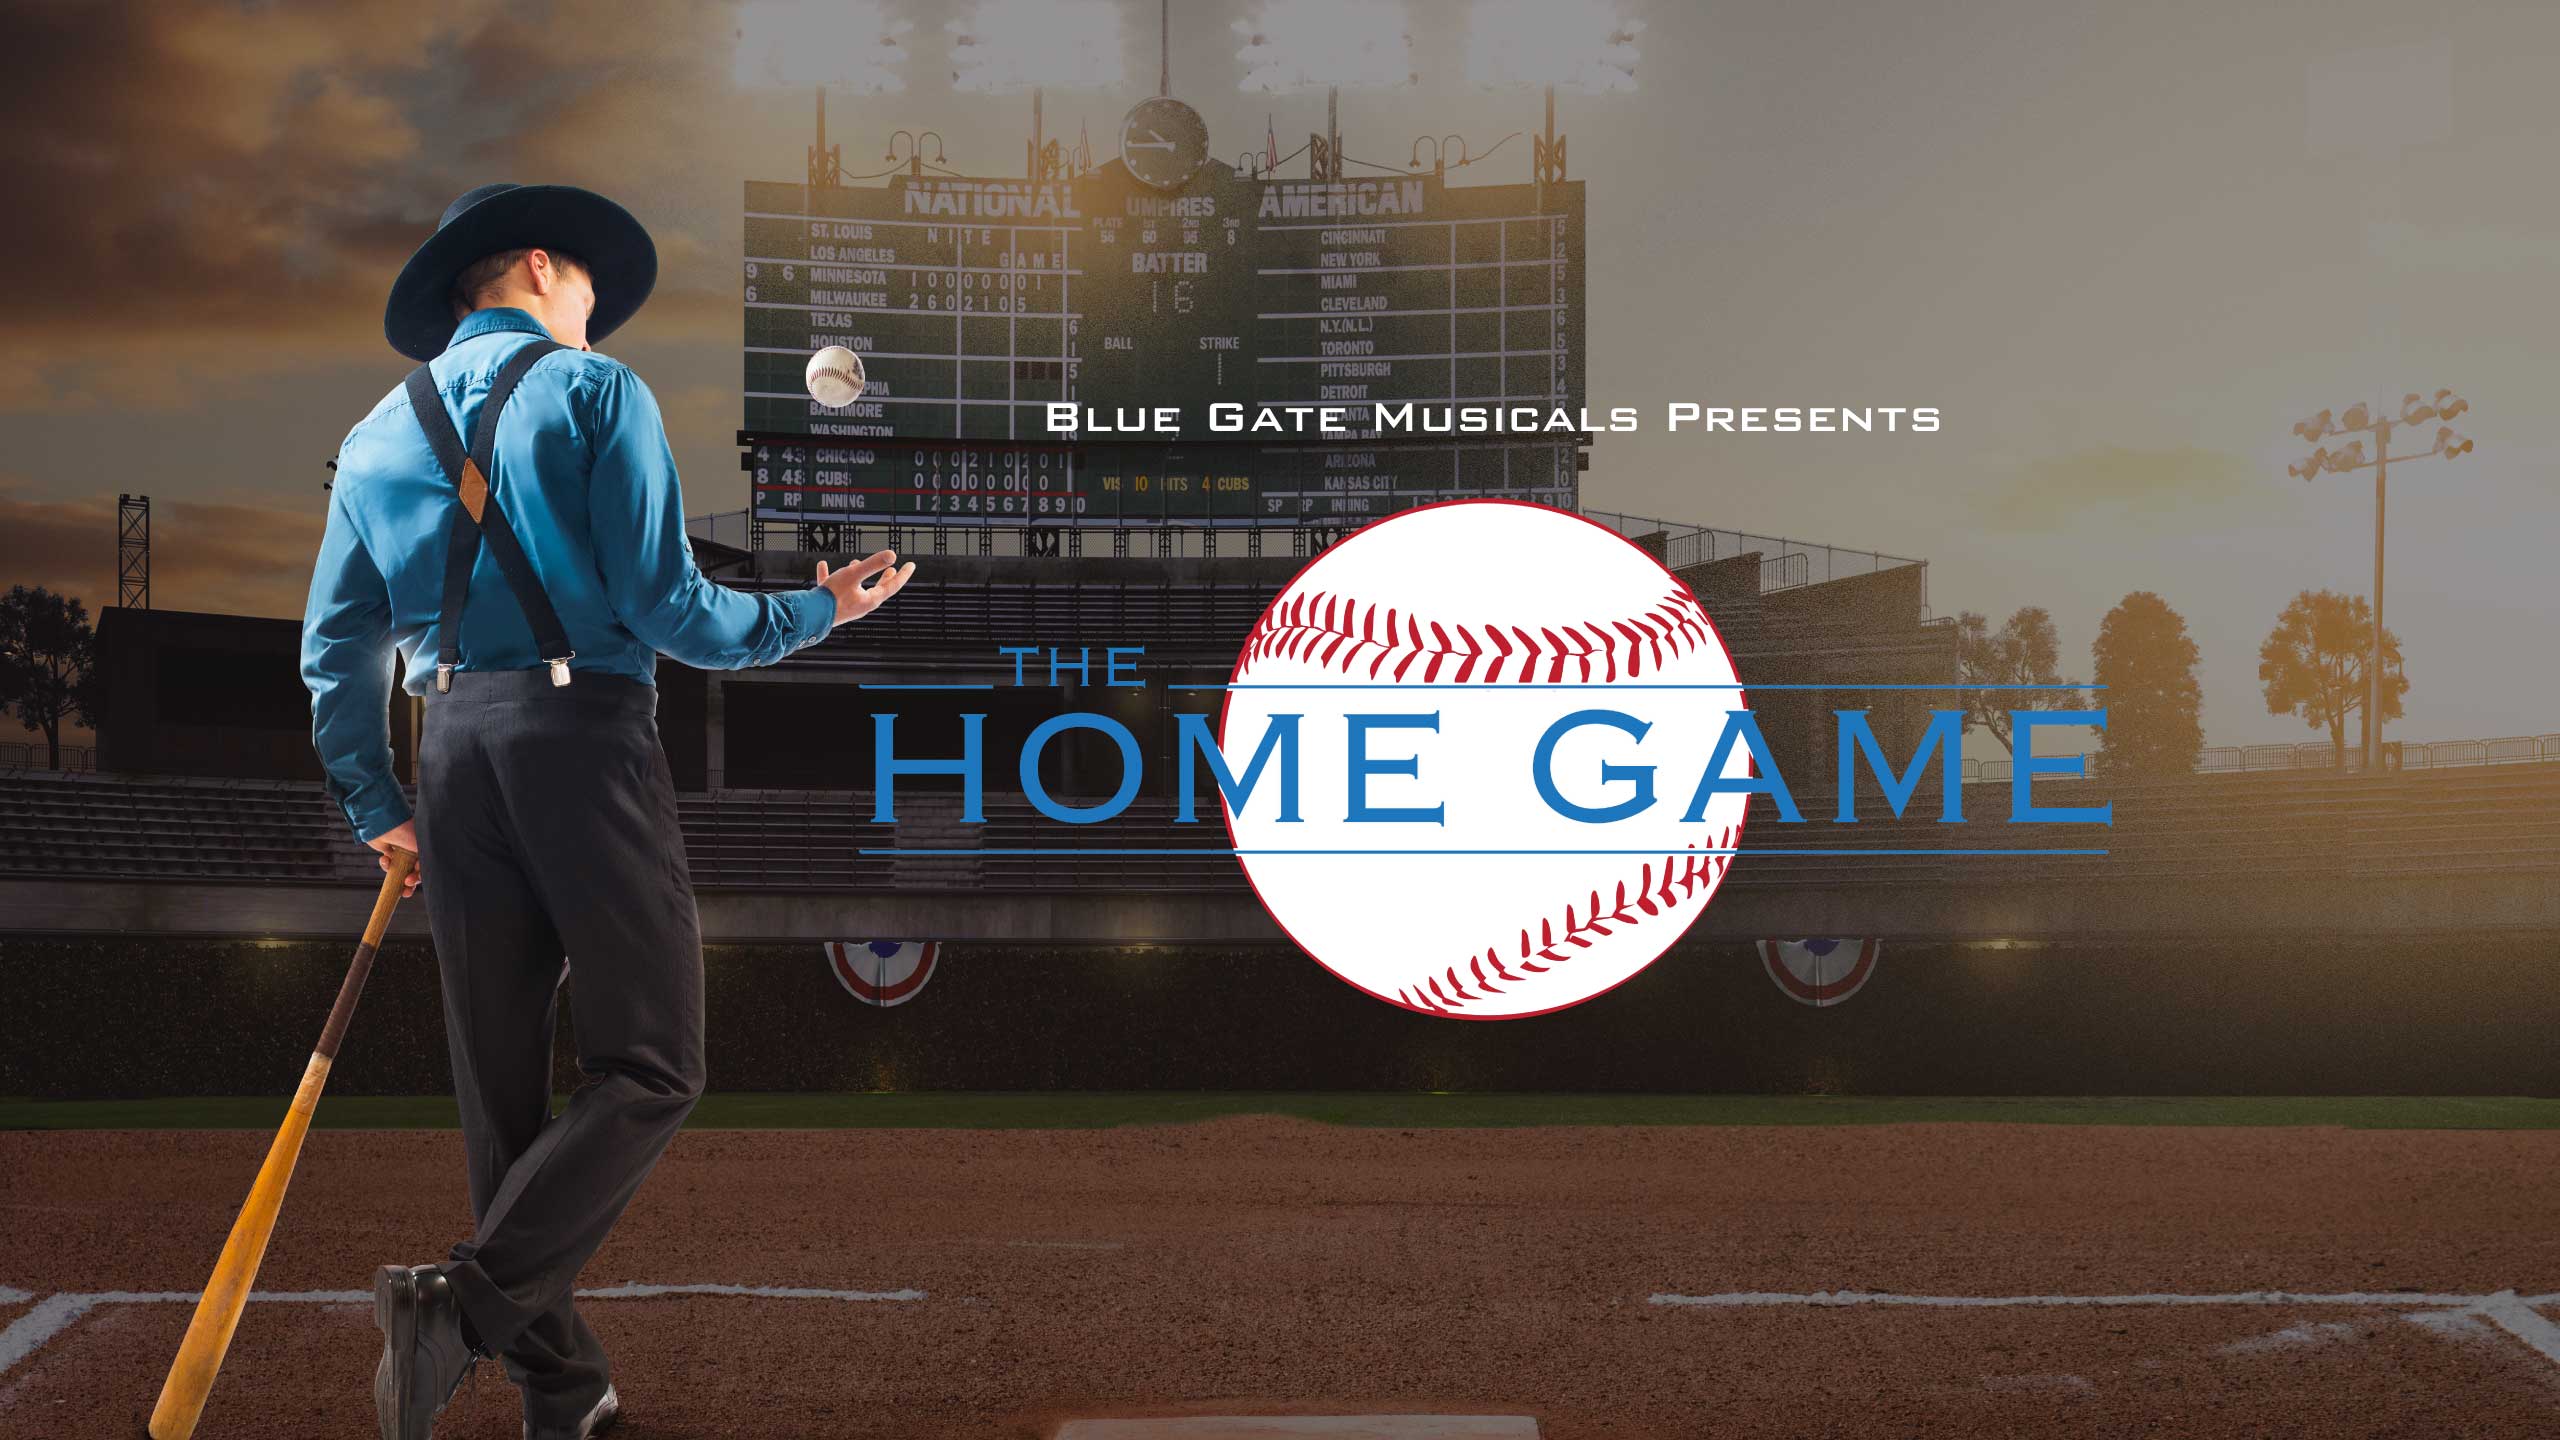 The Home Game Musical